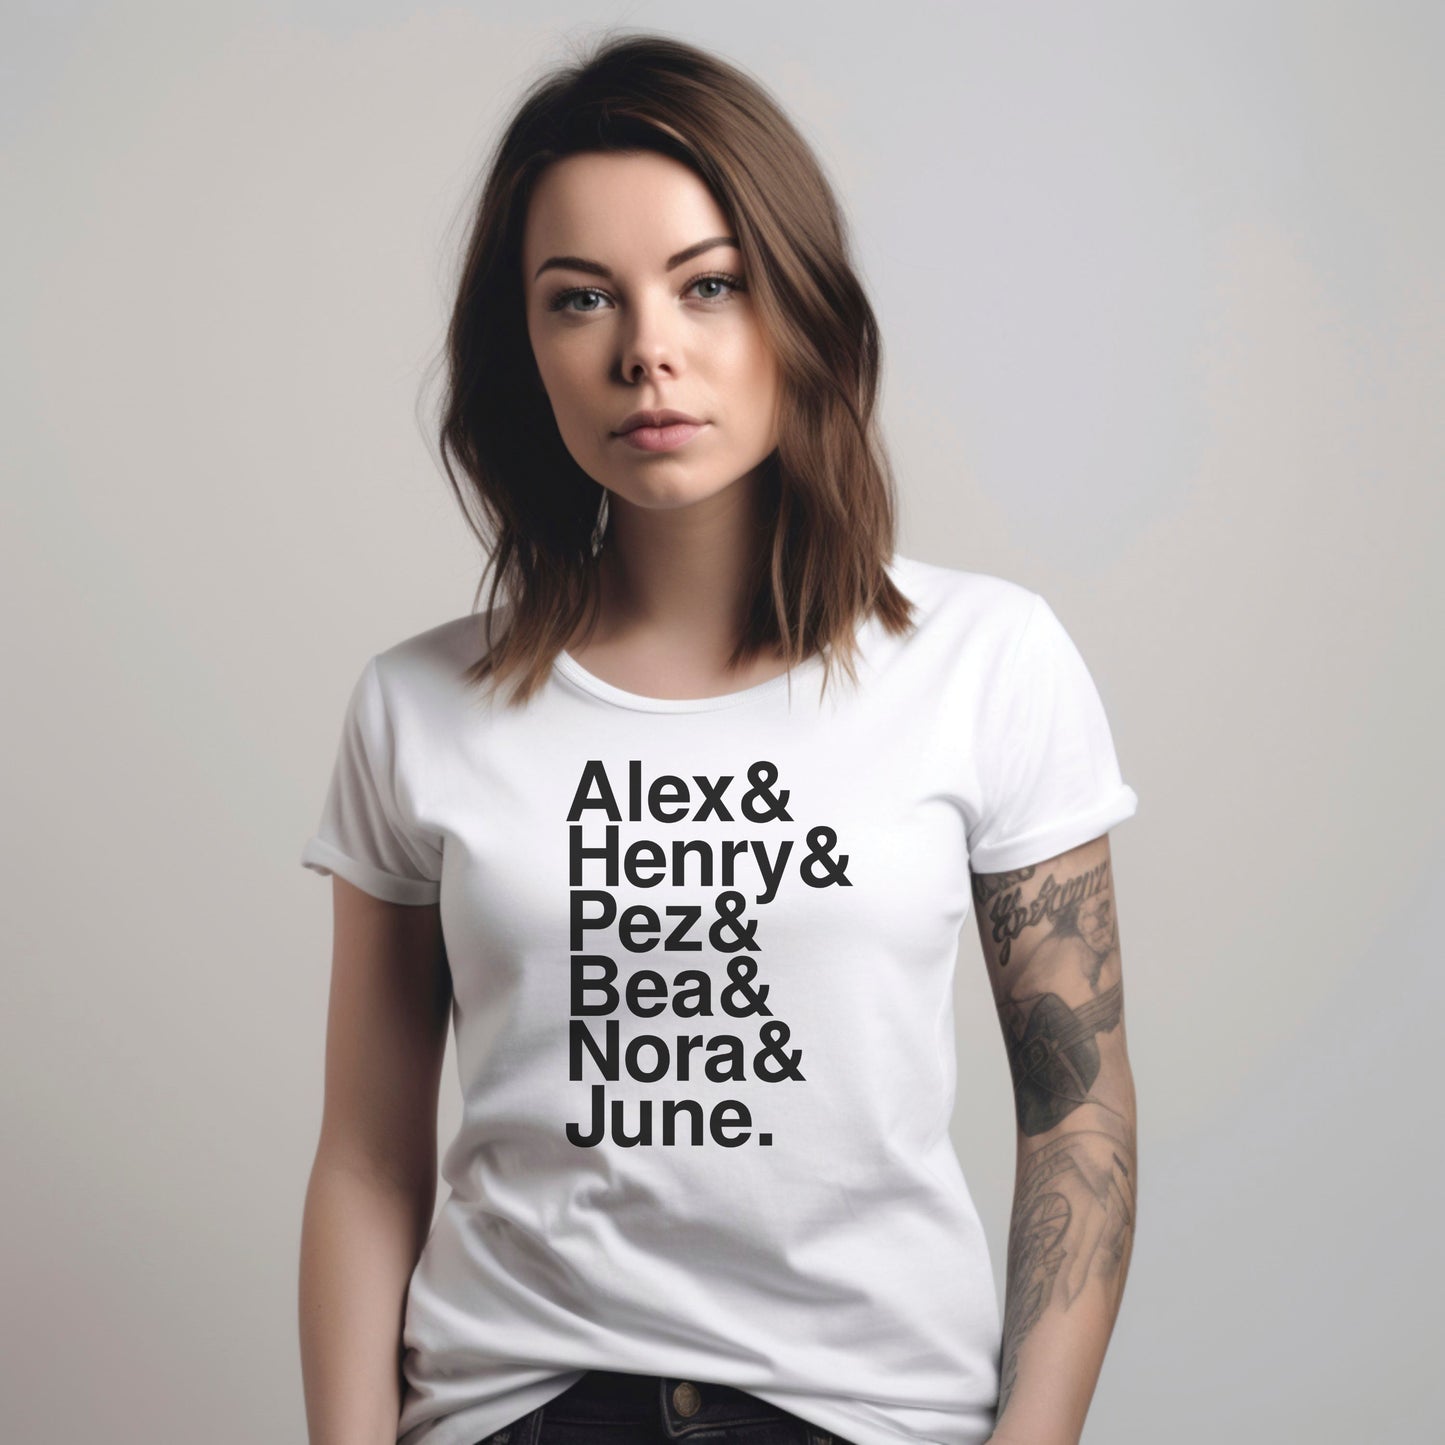 Red White & Royal Blue Character Names T-Shirt, RWRB, Booktok, Alex Claremont-Diaz, Prince Henry, Gifts for Readers, Book Lover, LGBTQ Queer